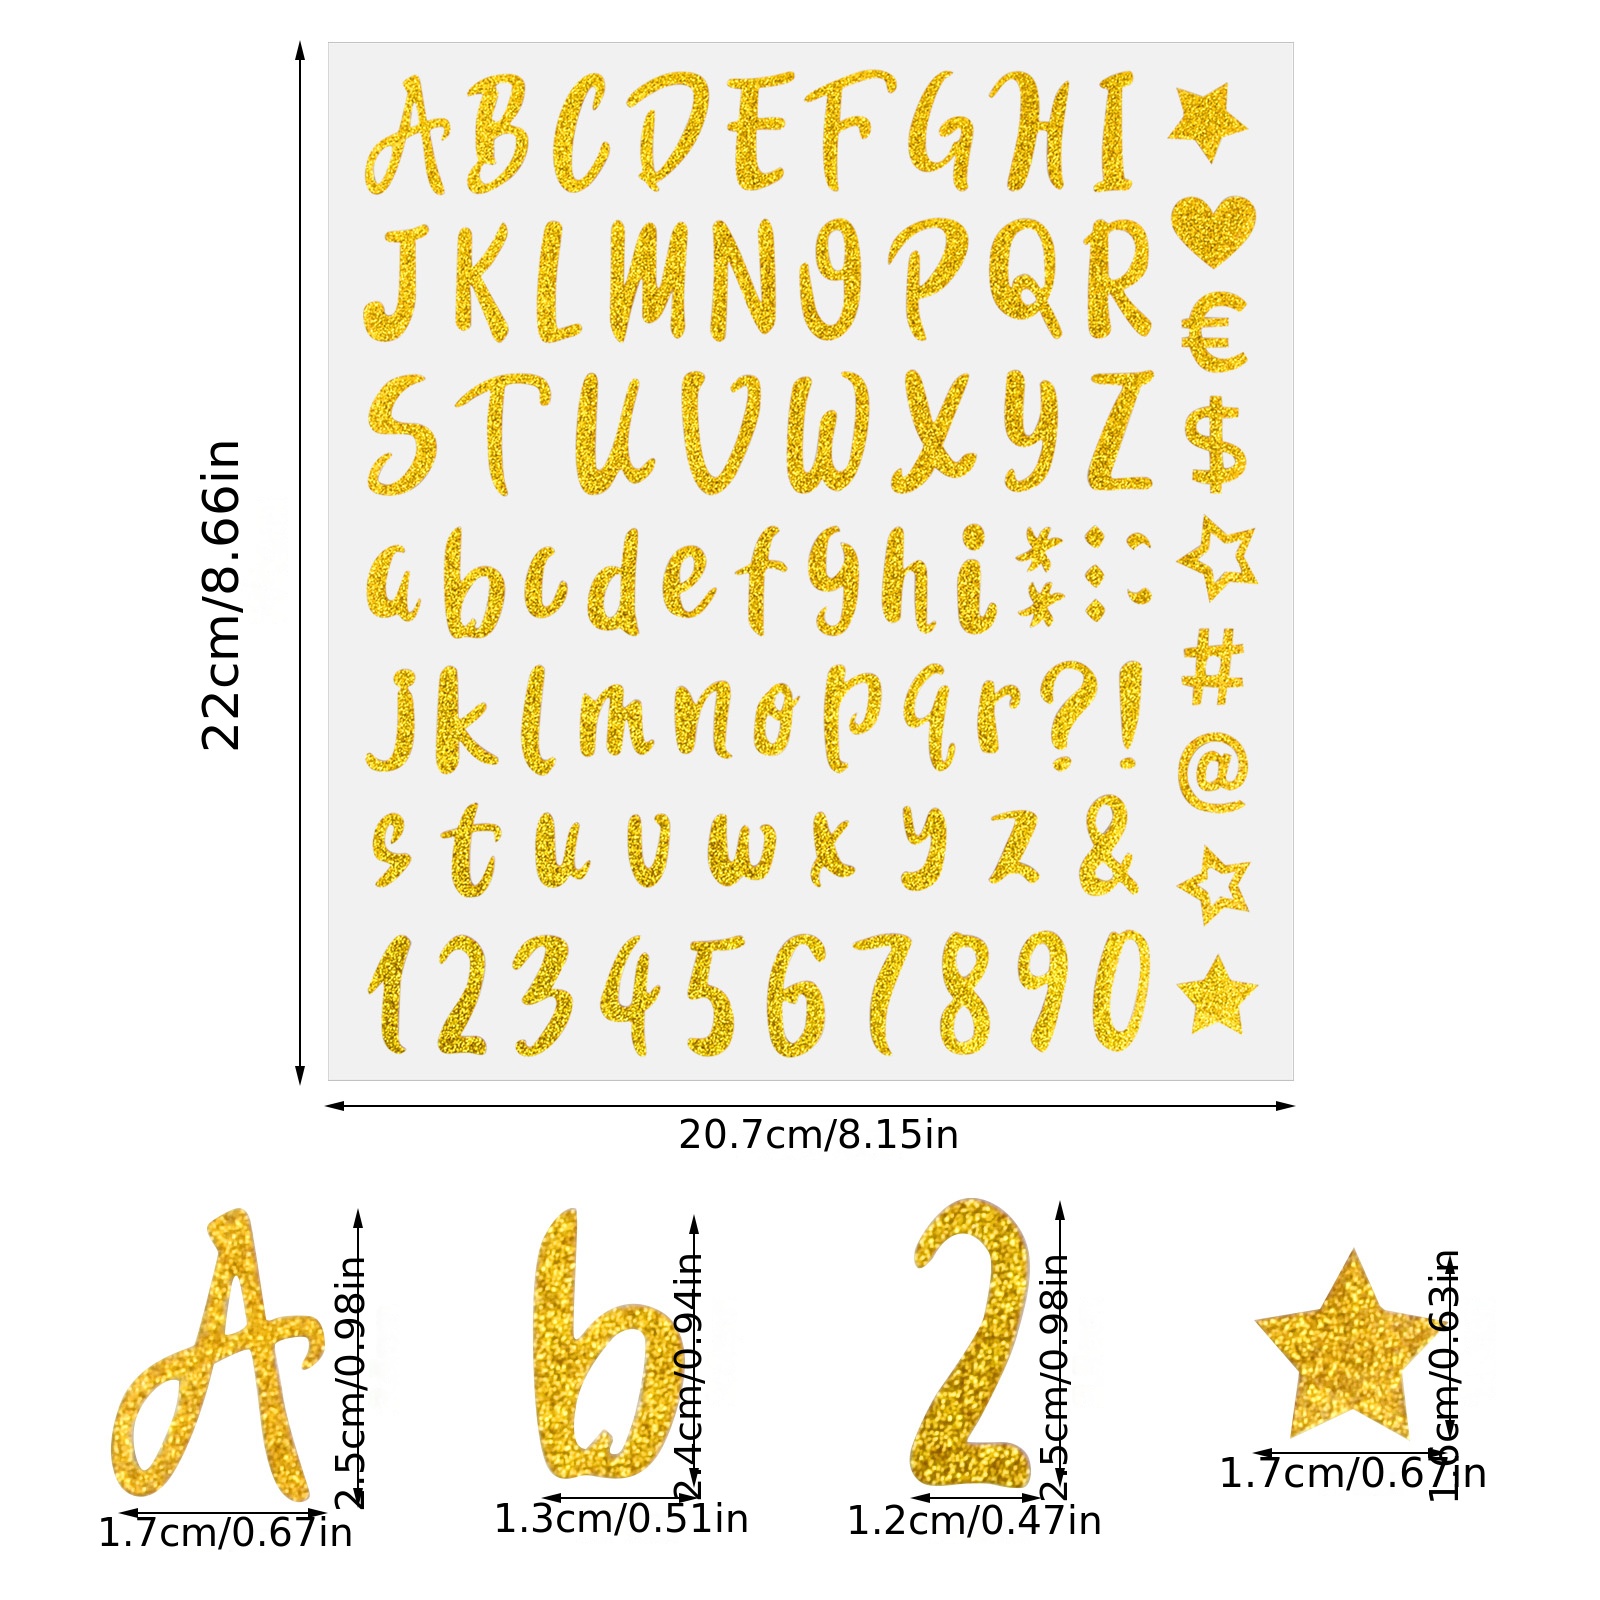 8 Silver Self-Adhesive Rhinestone Letter Stickers, Alphabet Stickers For  DIY Crafts - G